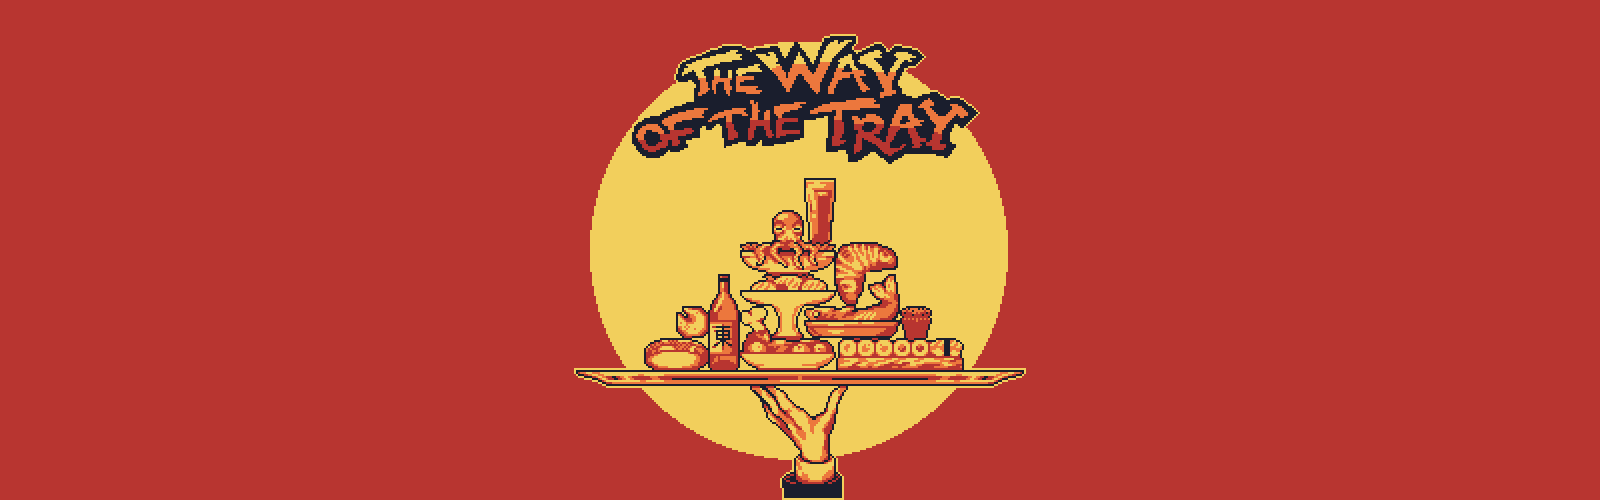 The Way of the Tray